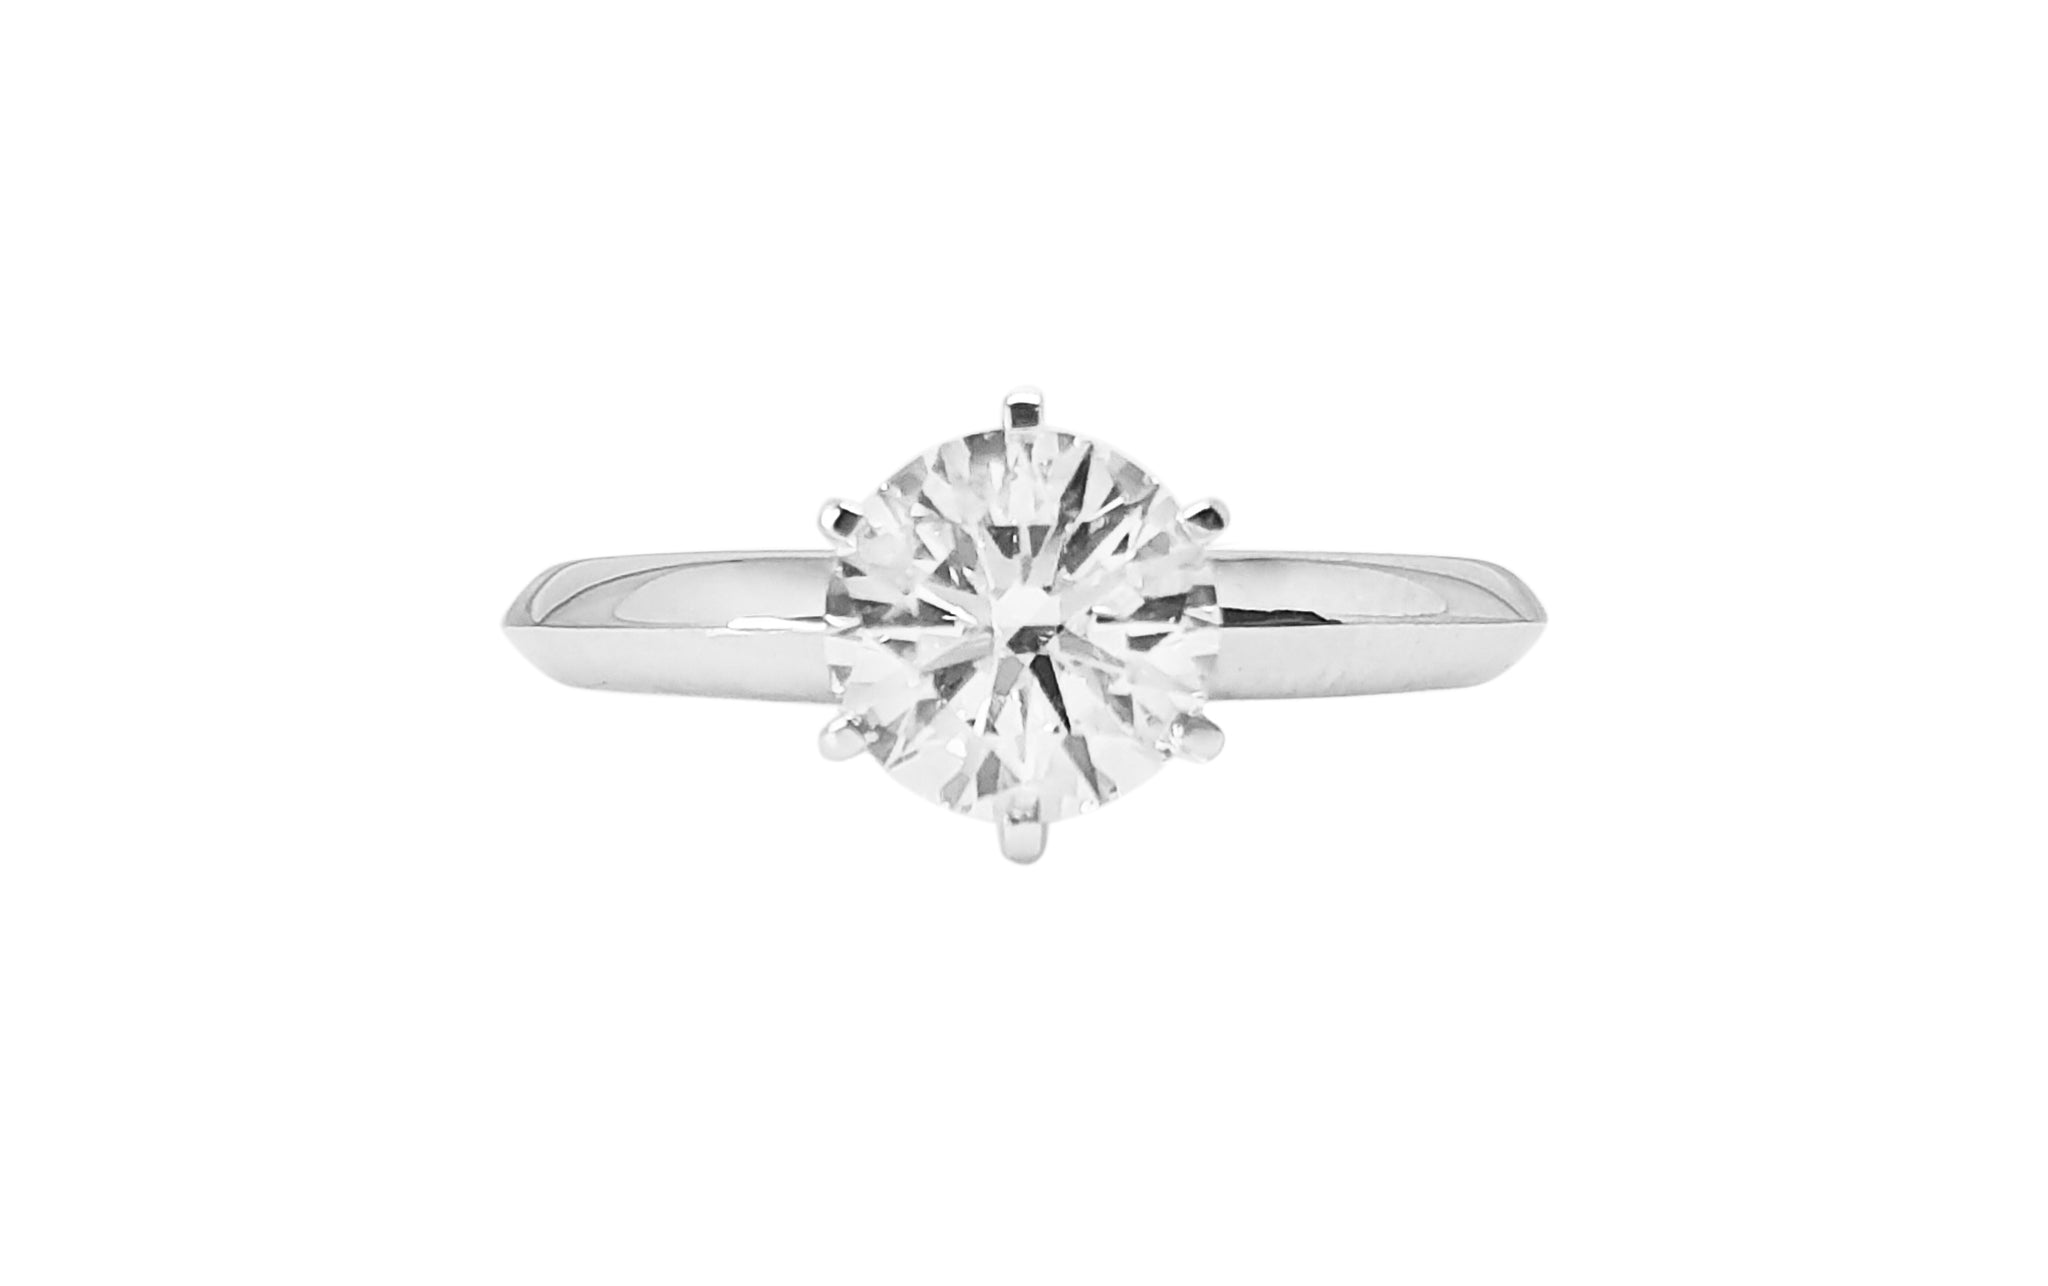 The One Solitaire Ring